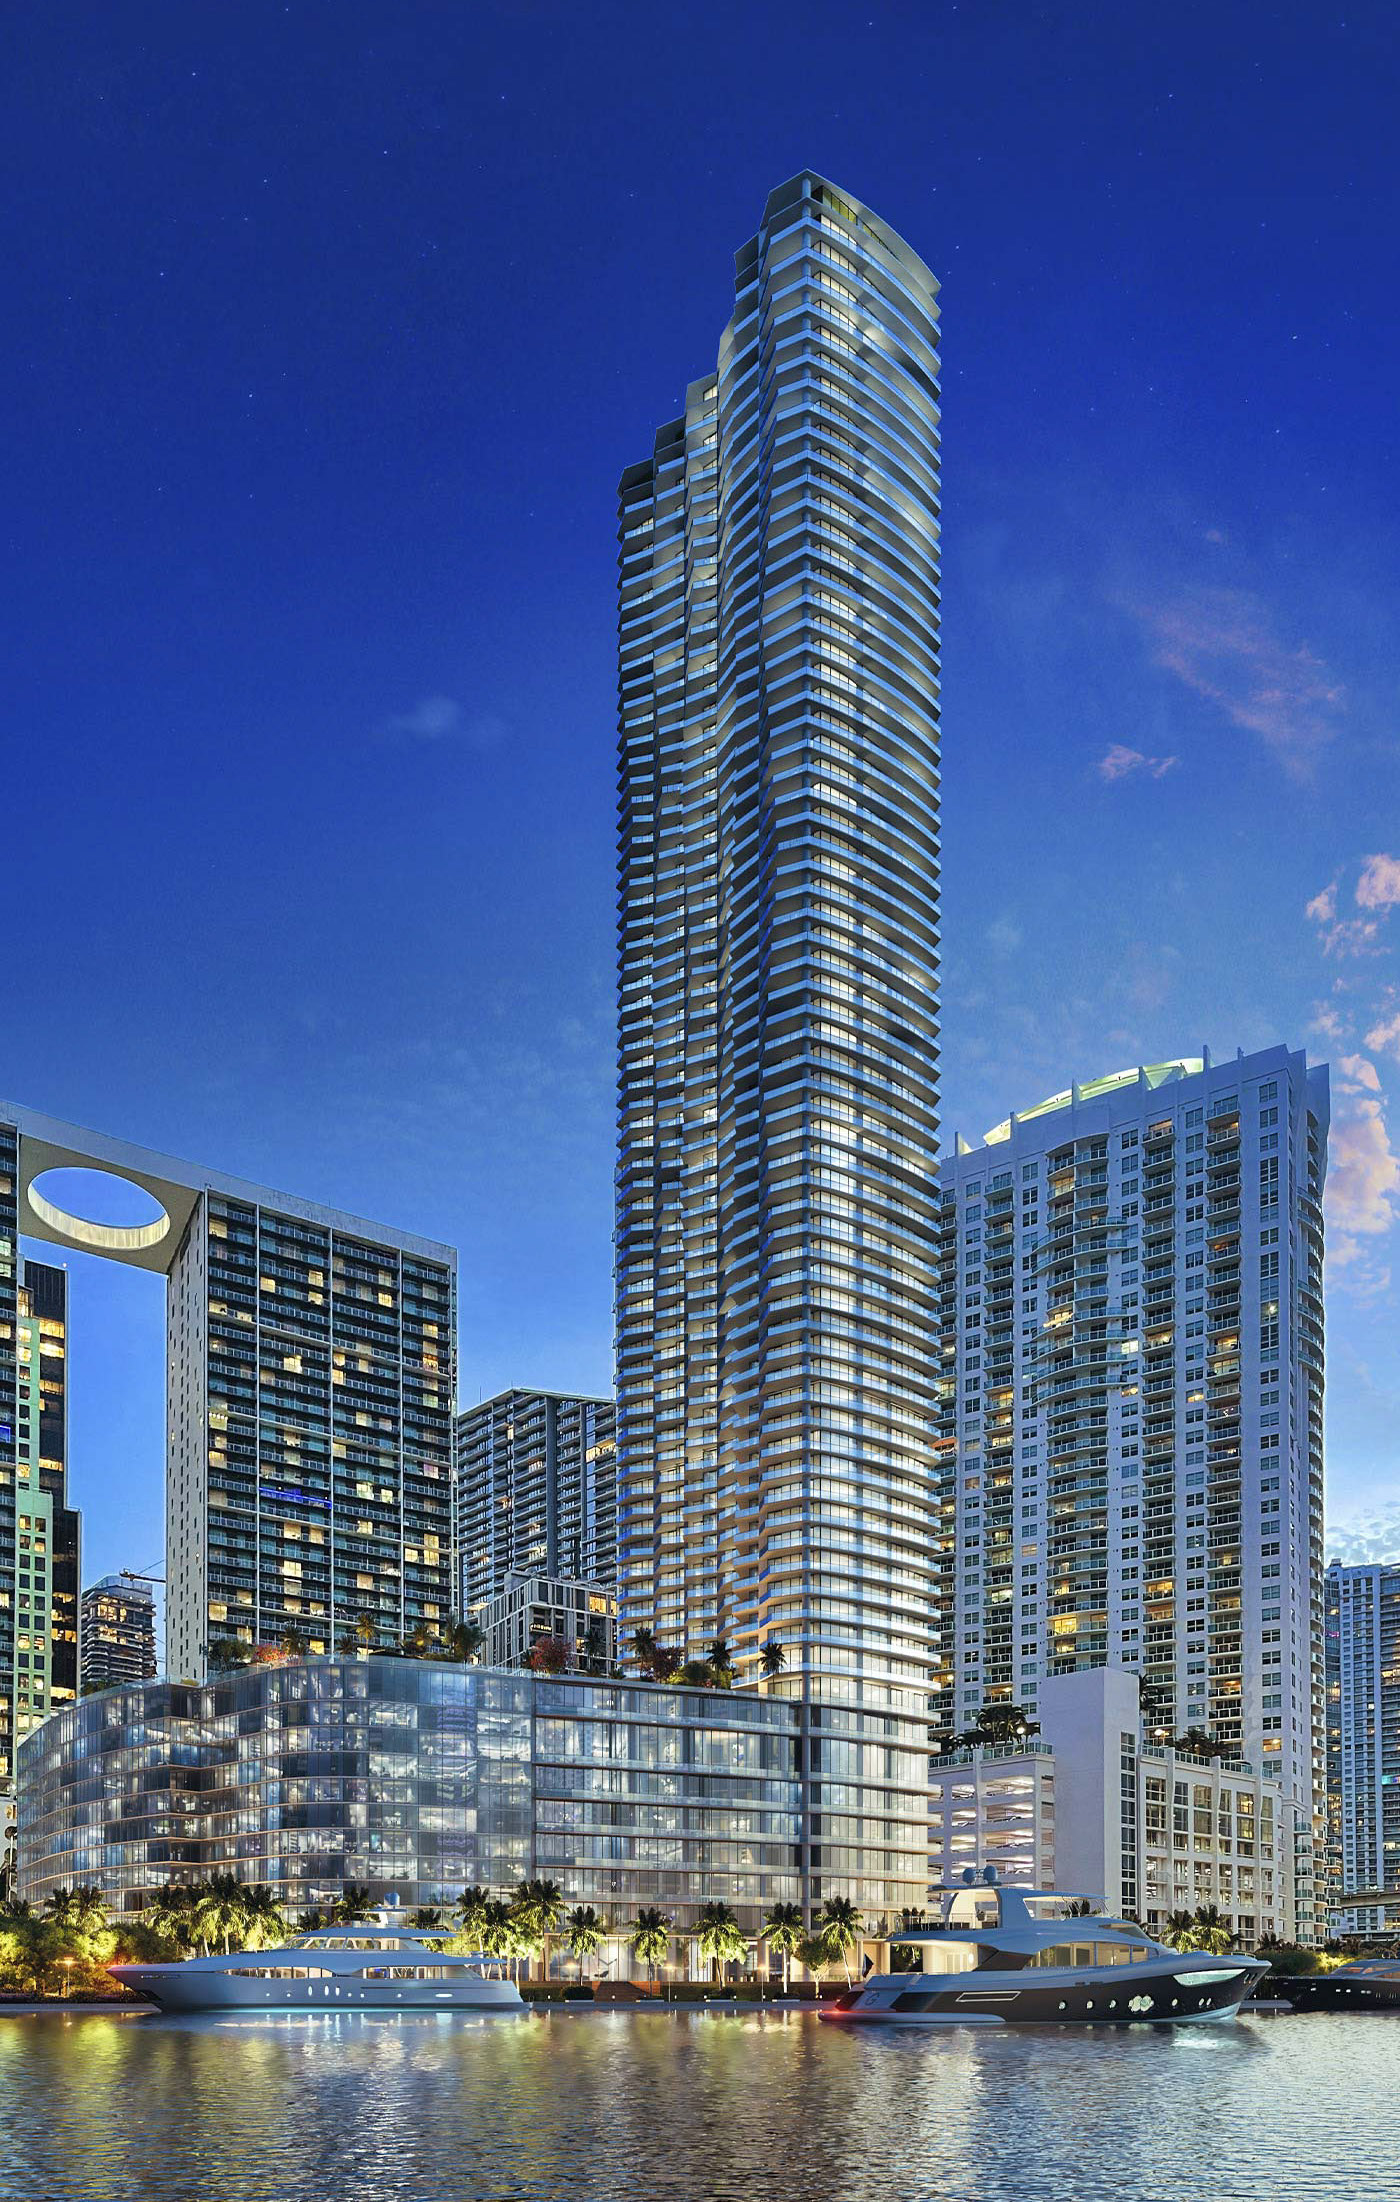 Tower Building – Baccarat Residences – Brickell, Miami